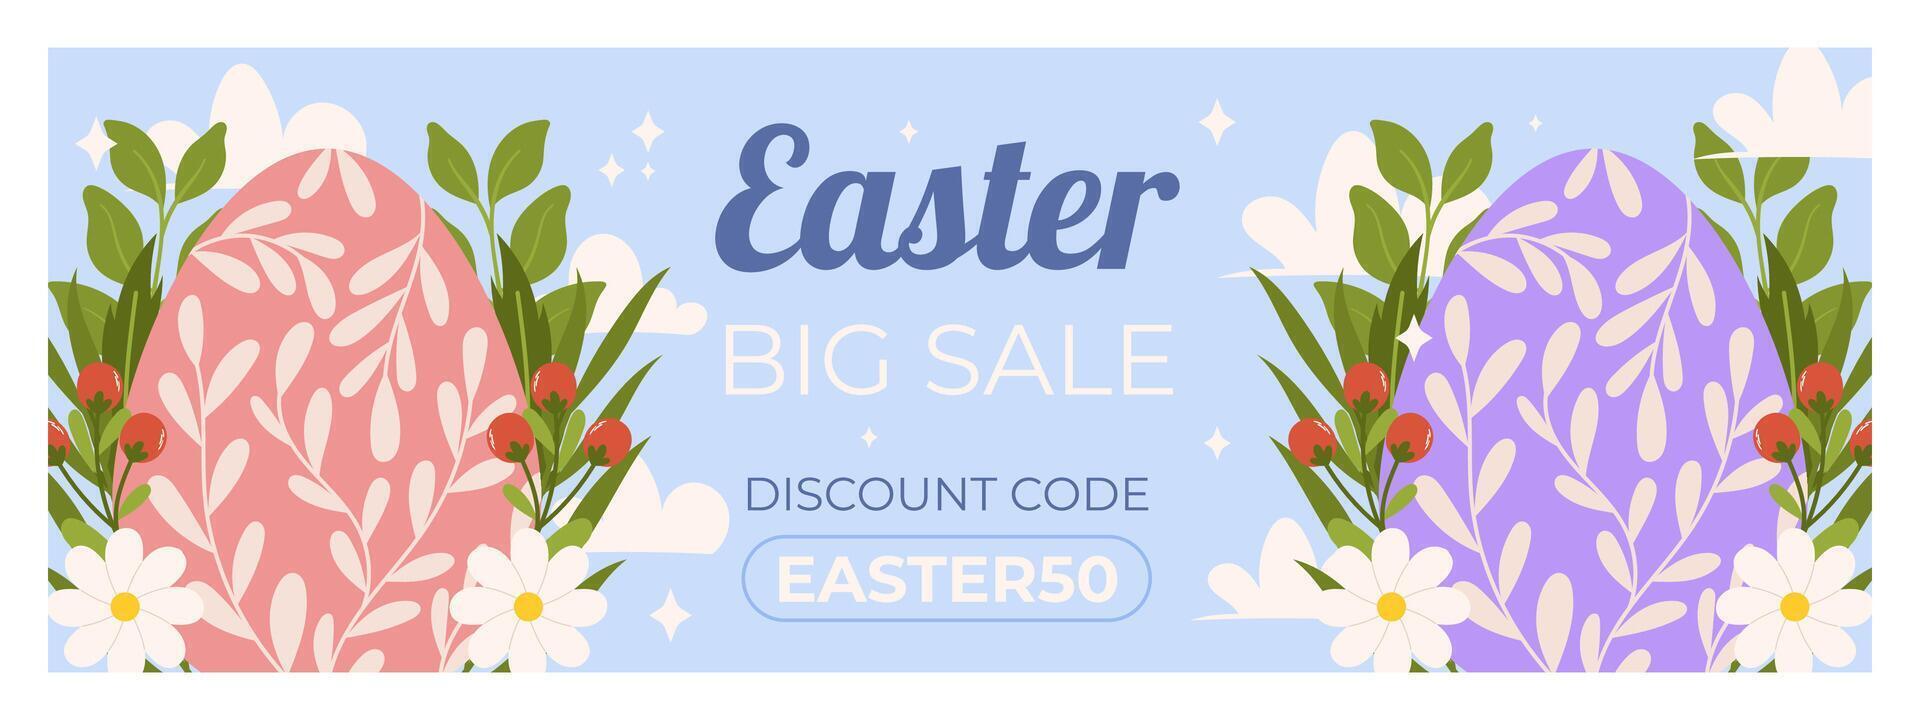 Easter sale horizontal banner template for promotion. Design on sky blue background with painted eggs, leaves and flowers vector